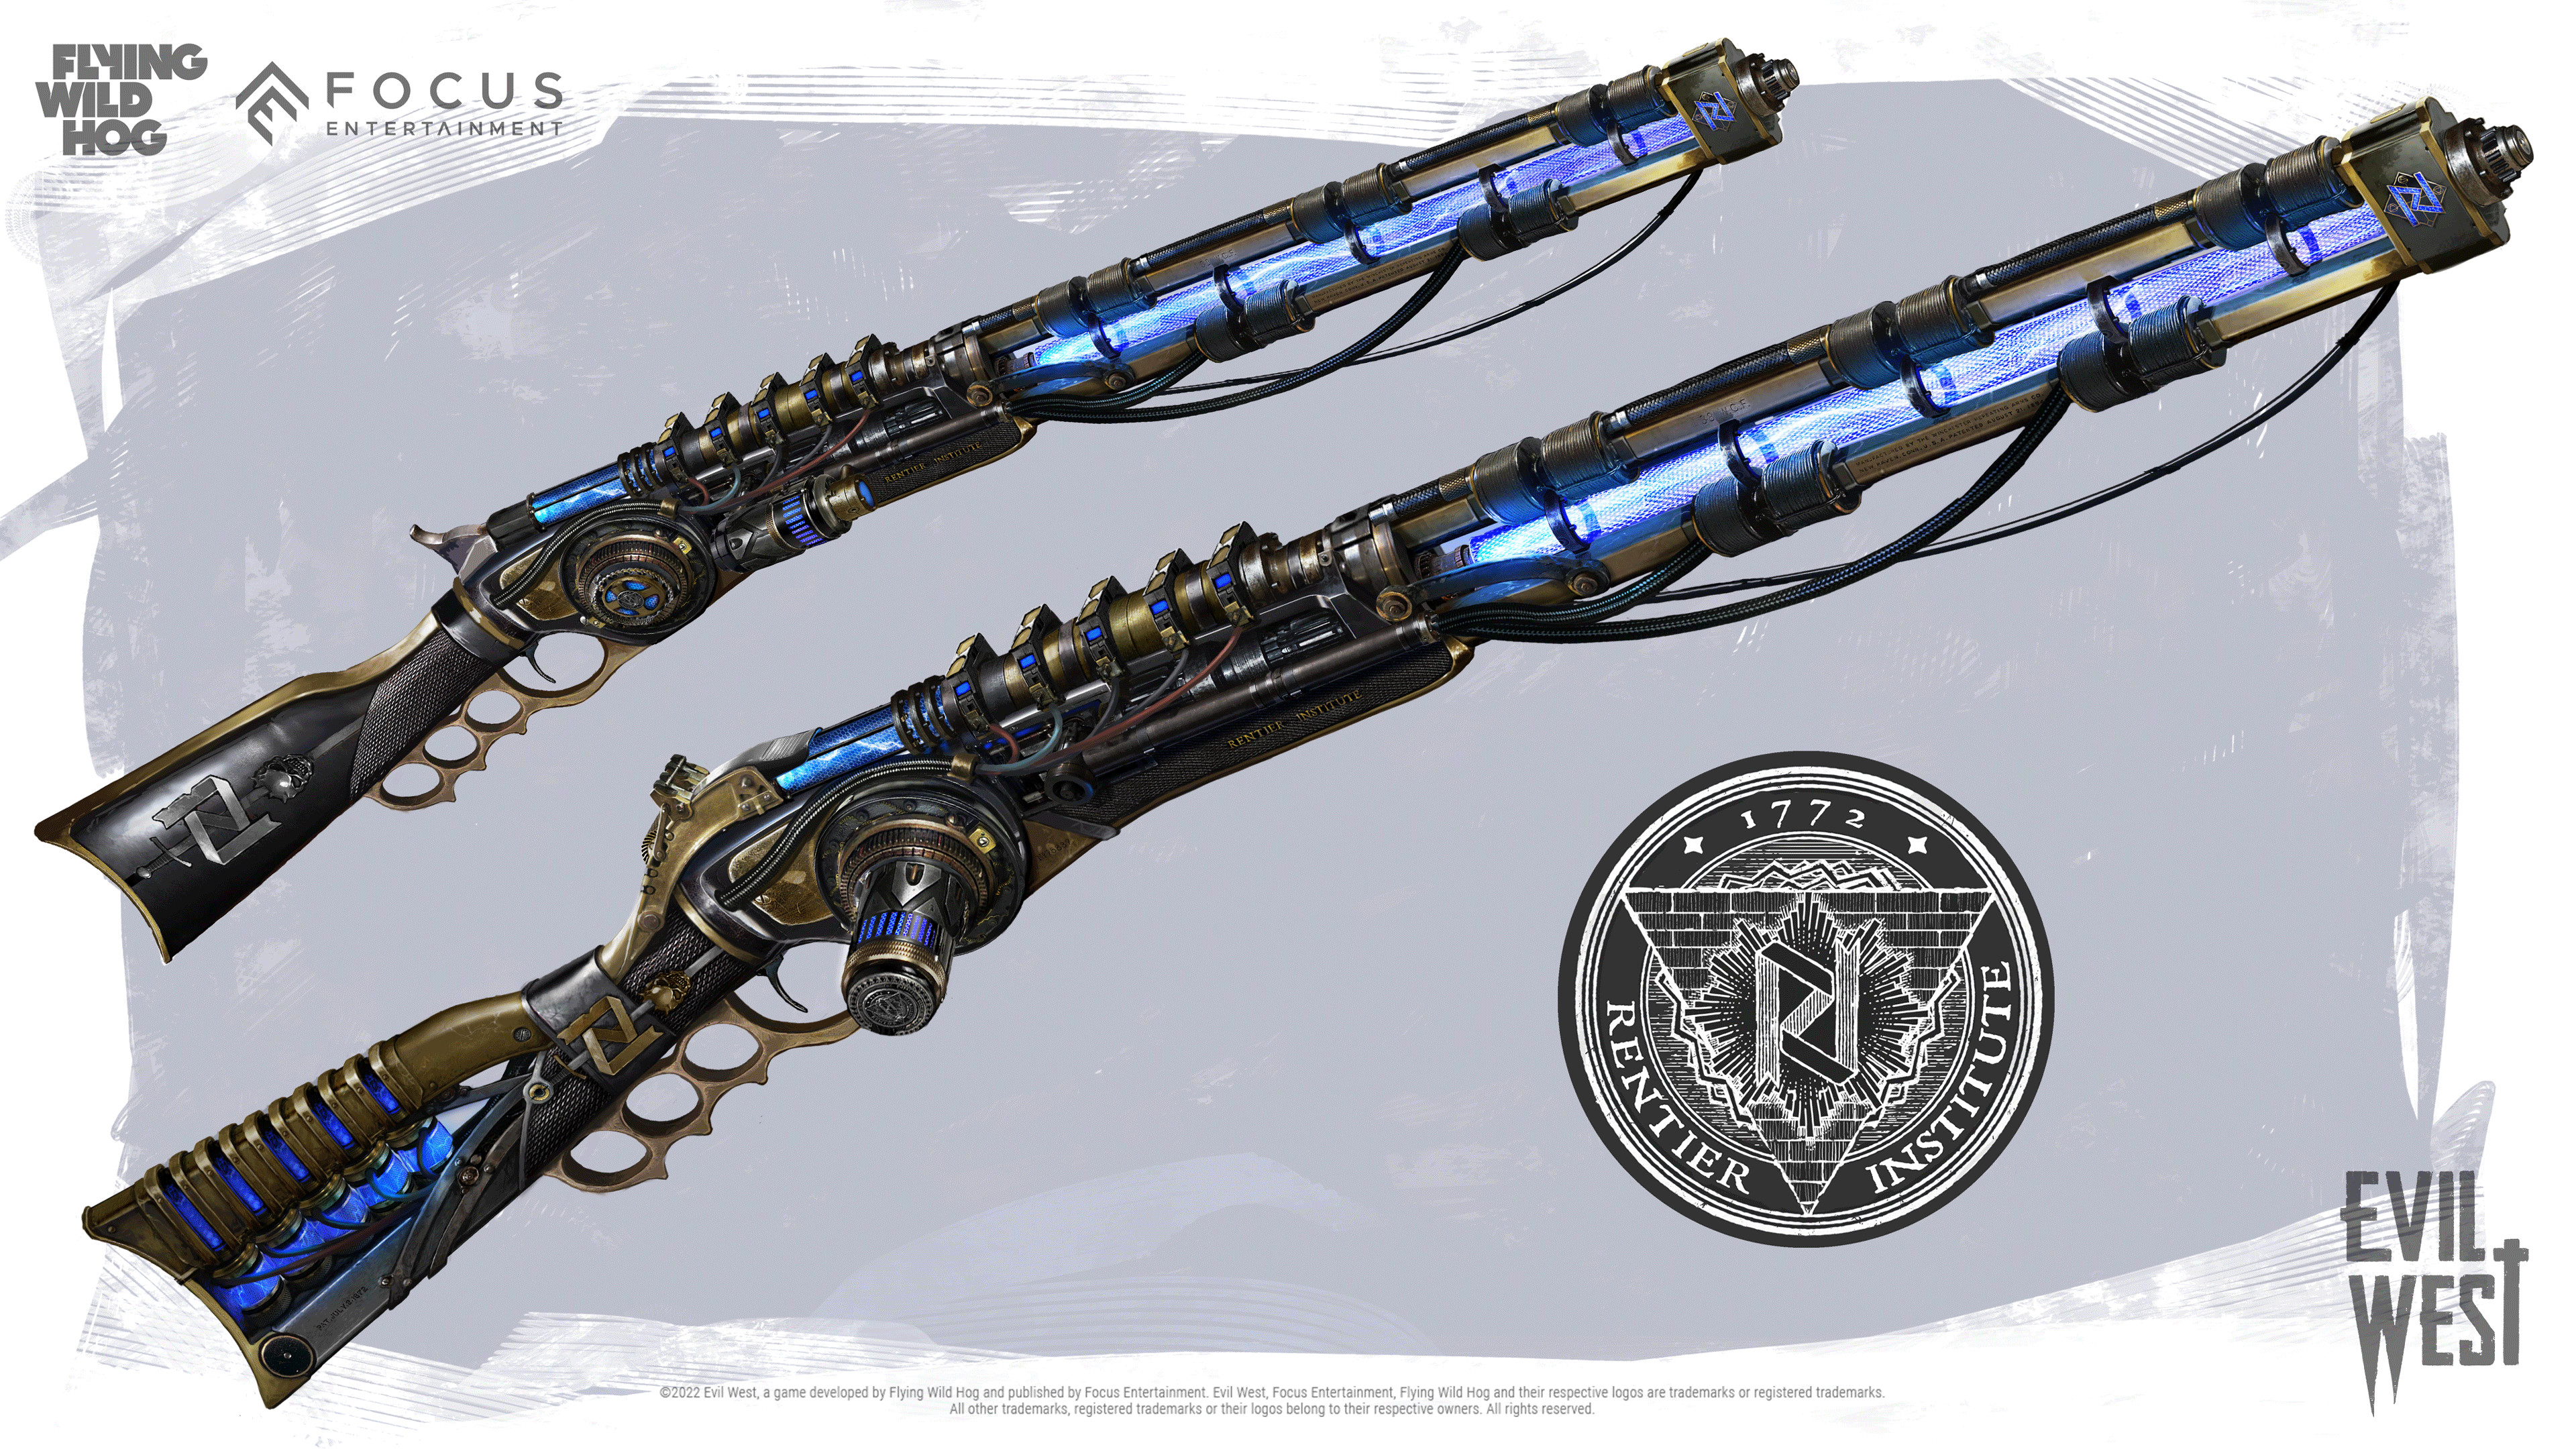 This is an Electric Winchester Rifle concept prepared for "Evil West" video game. This is one of several weapon concepts I created for this game.